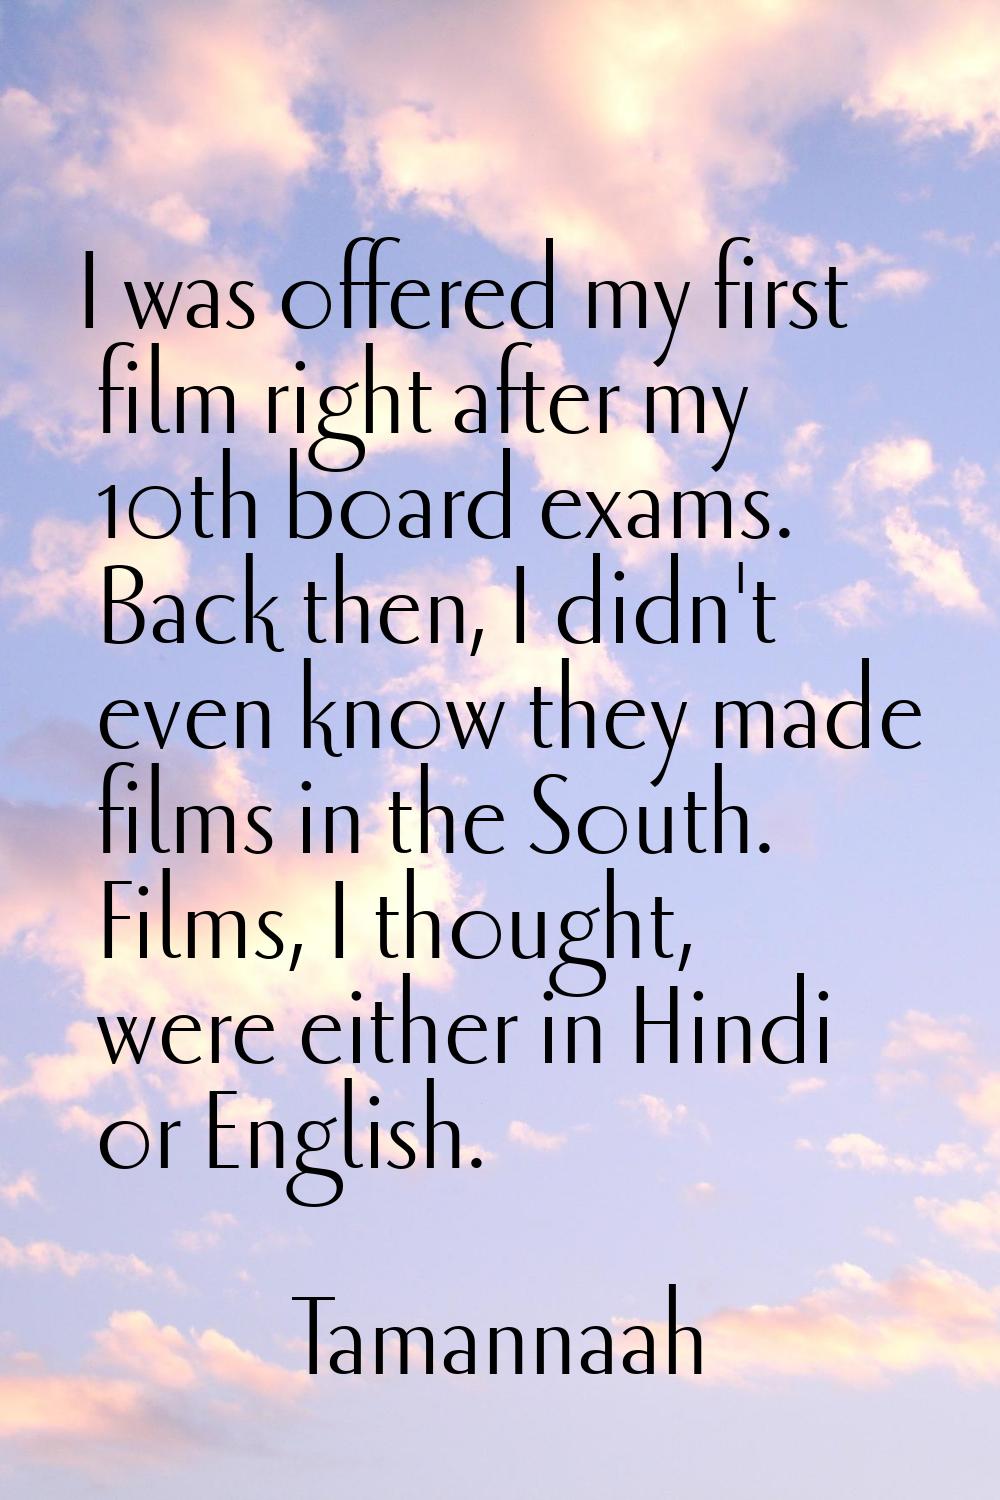 I was offered my first film right after my 10th board exams. Back then, I didn't even know they mad